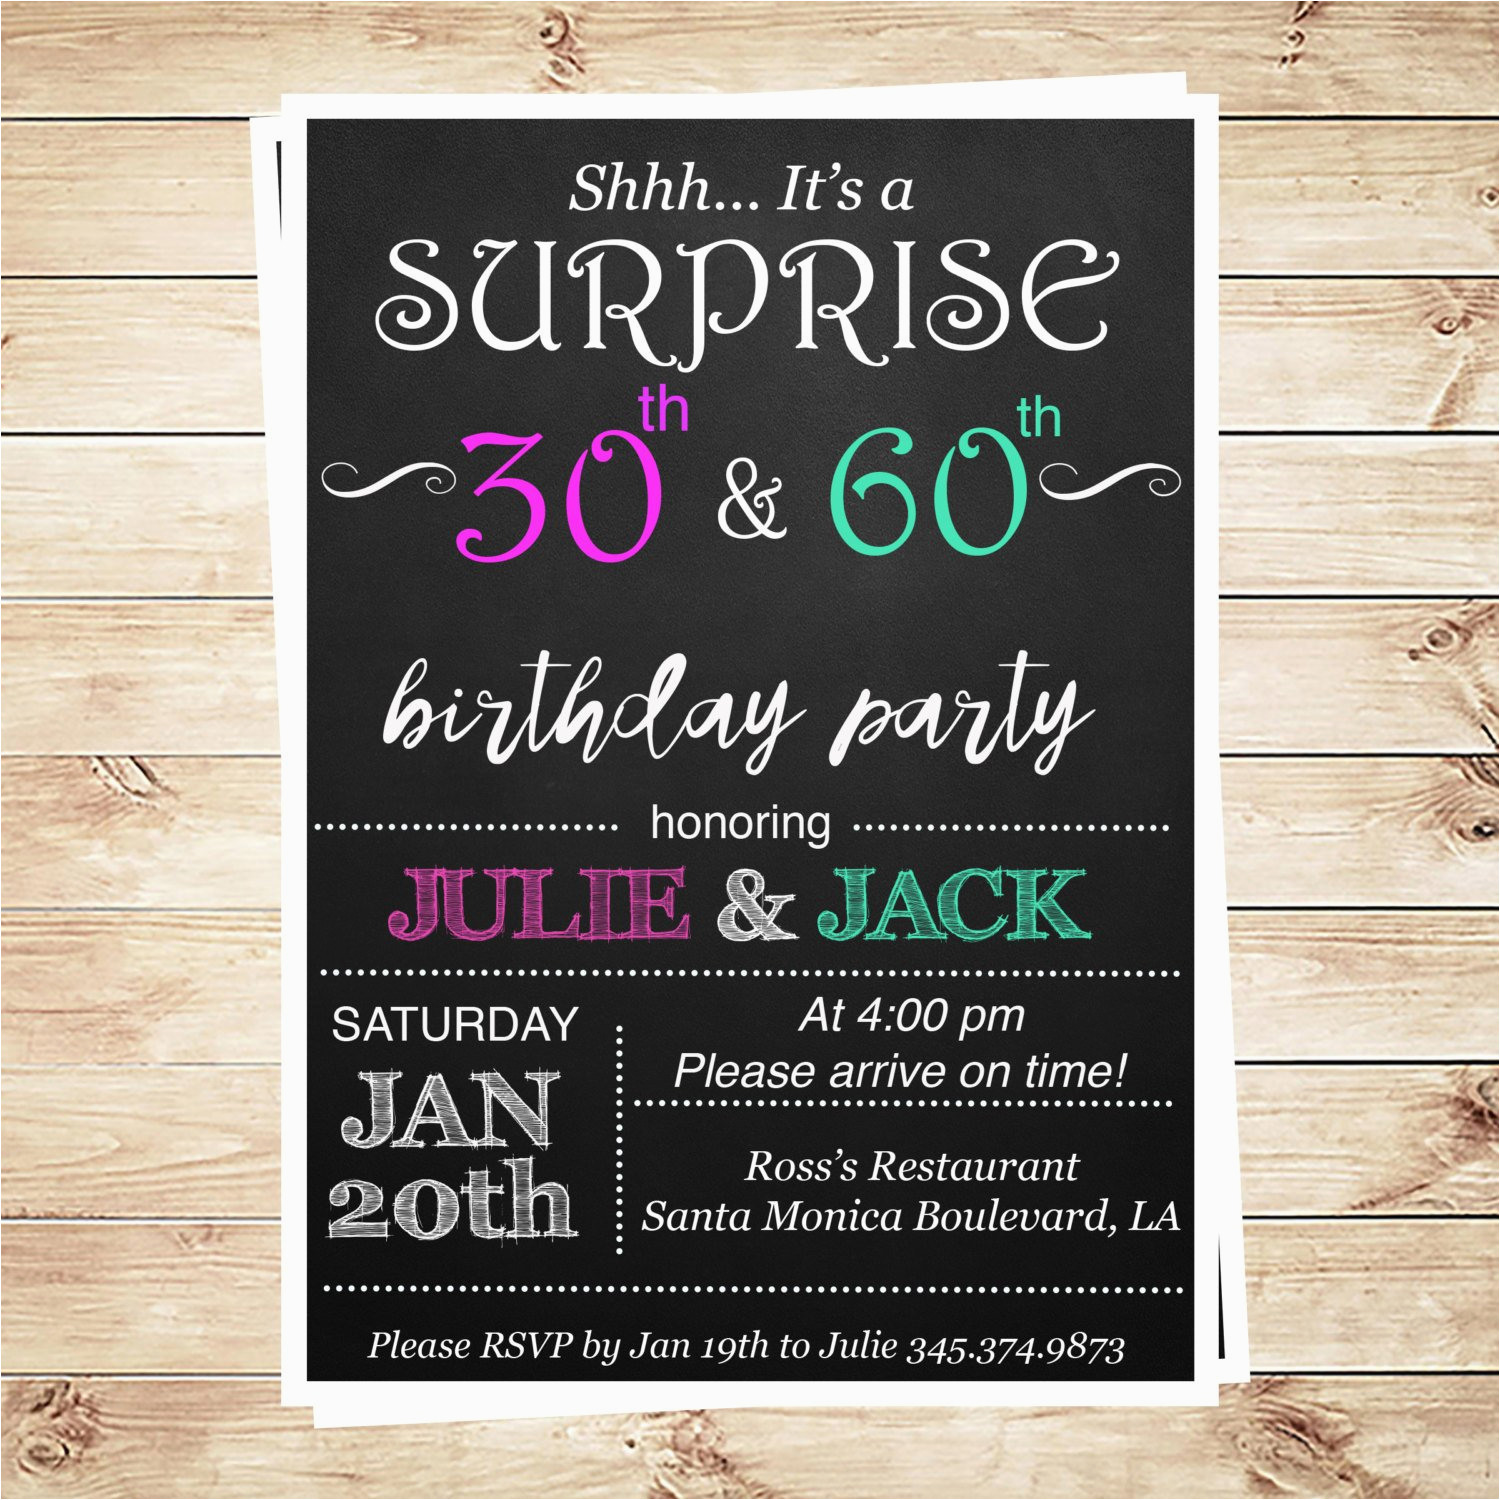 joint birthday party invitations for adults by